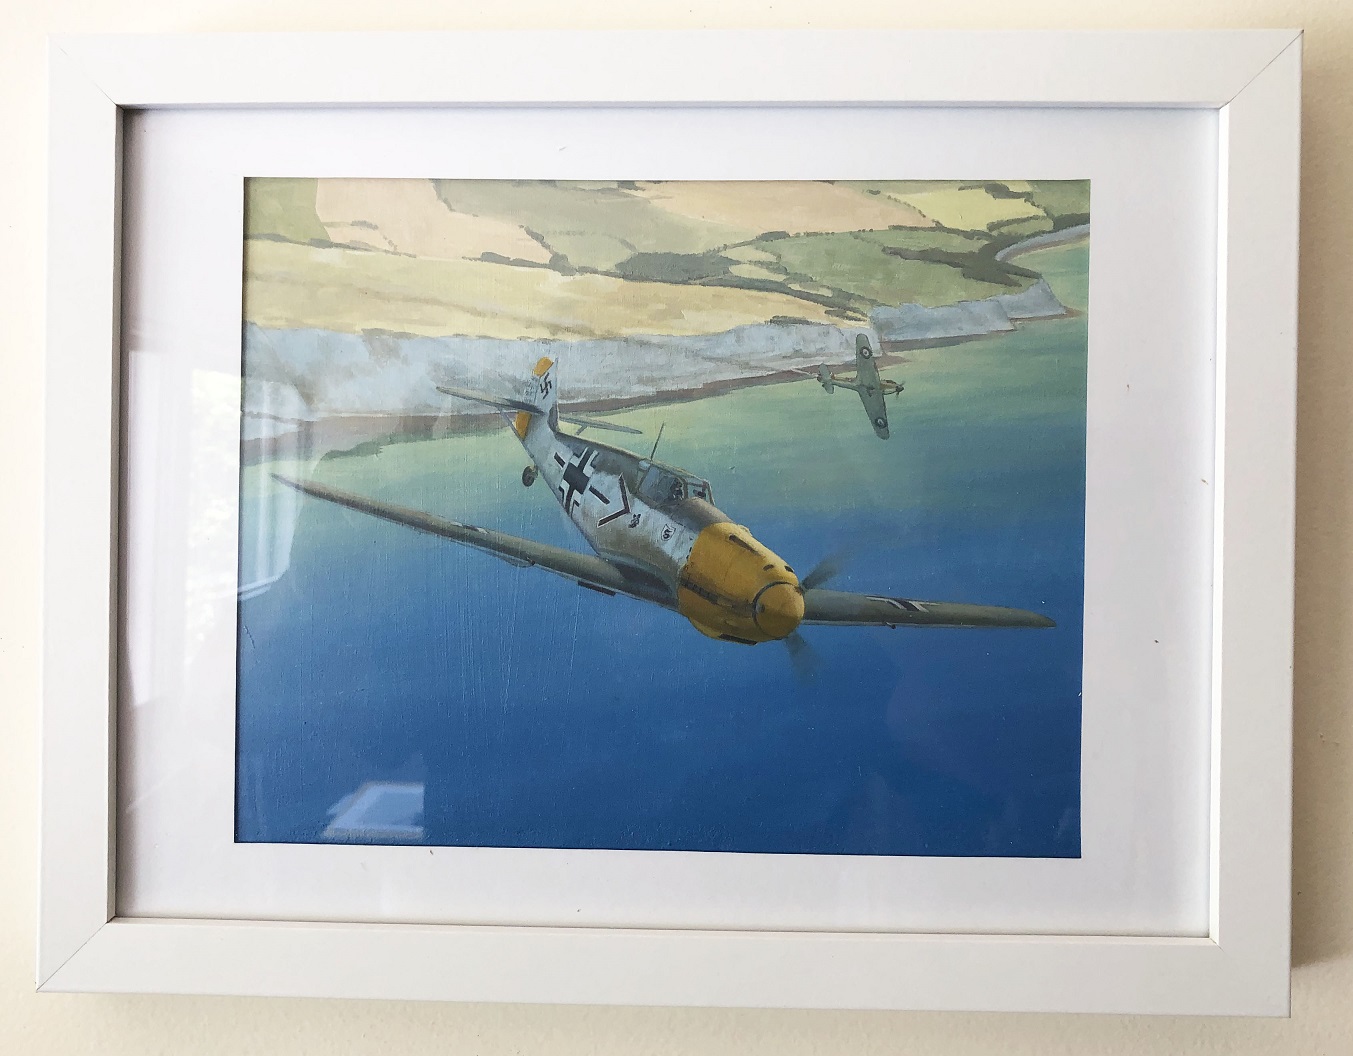 Me Bf109E painting